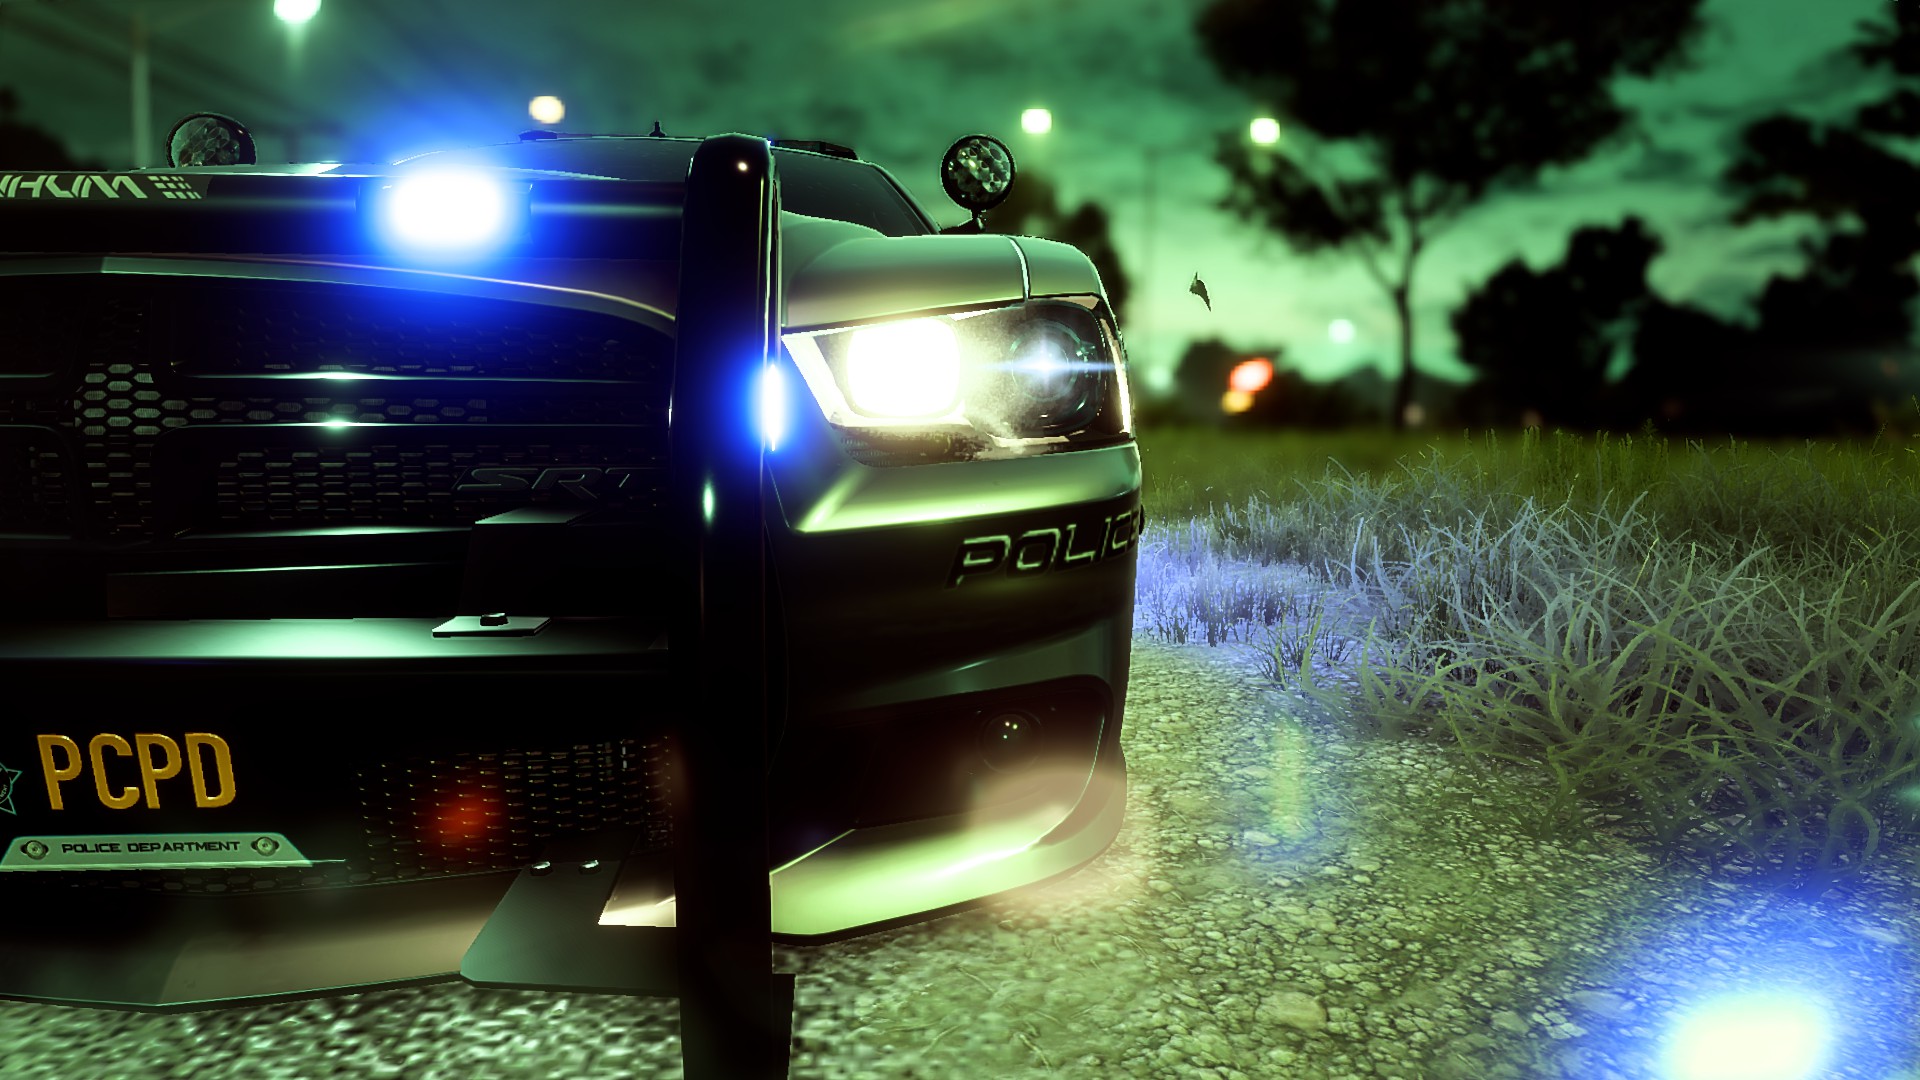 Need For Speed Heat Car Tuning Dodge Charger Police Cars Night Runner 1920x1080